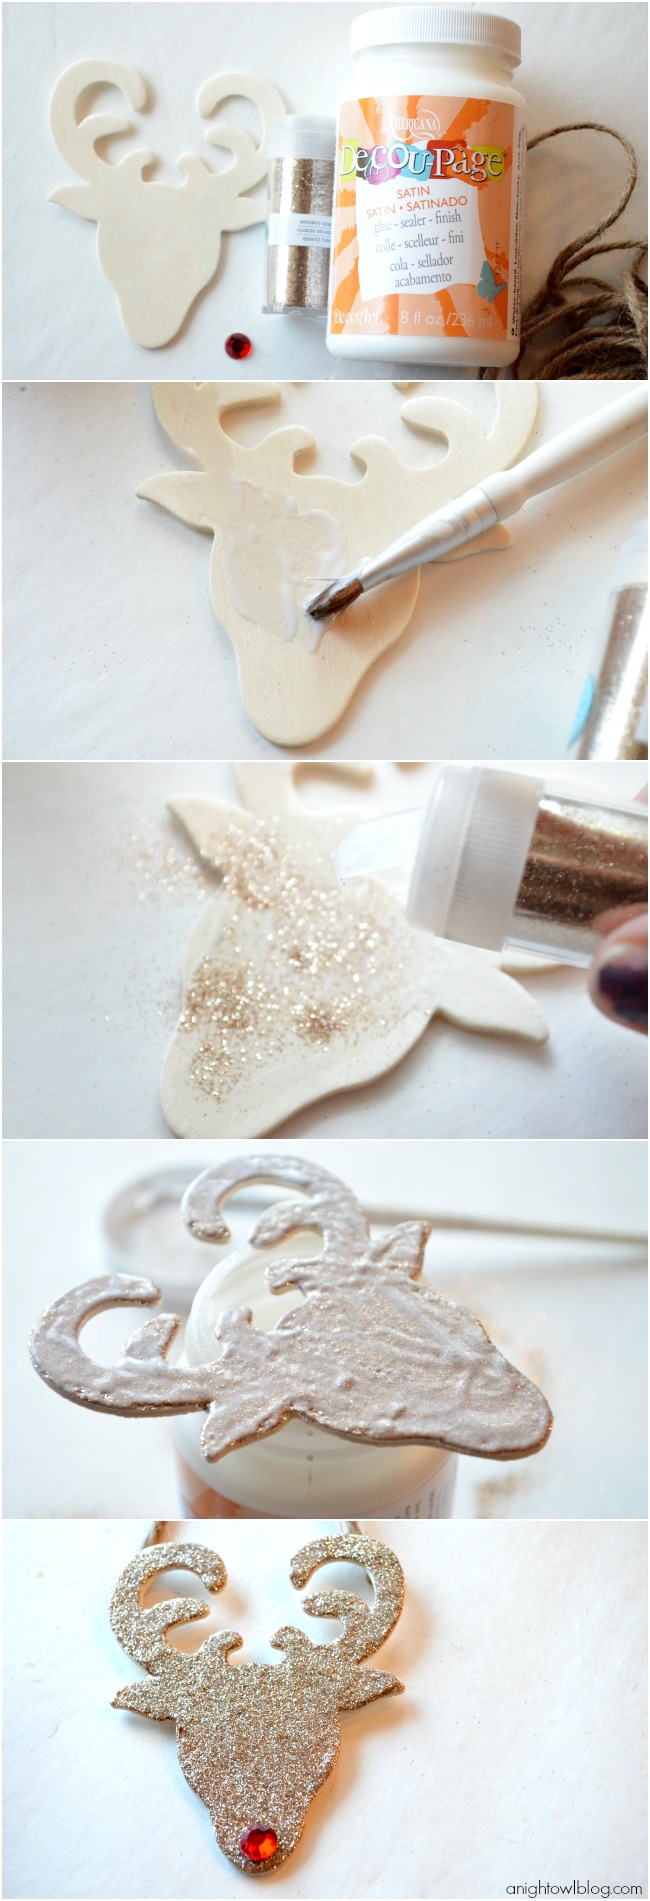 Check out the quick and easy how-to for these Glitter Reindeer Ornaments!